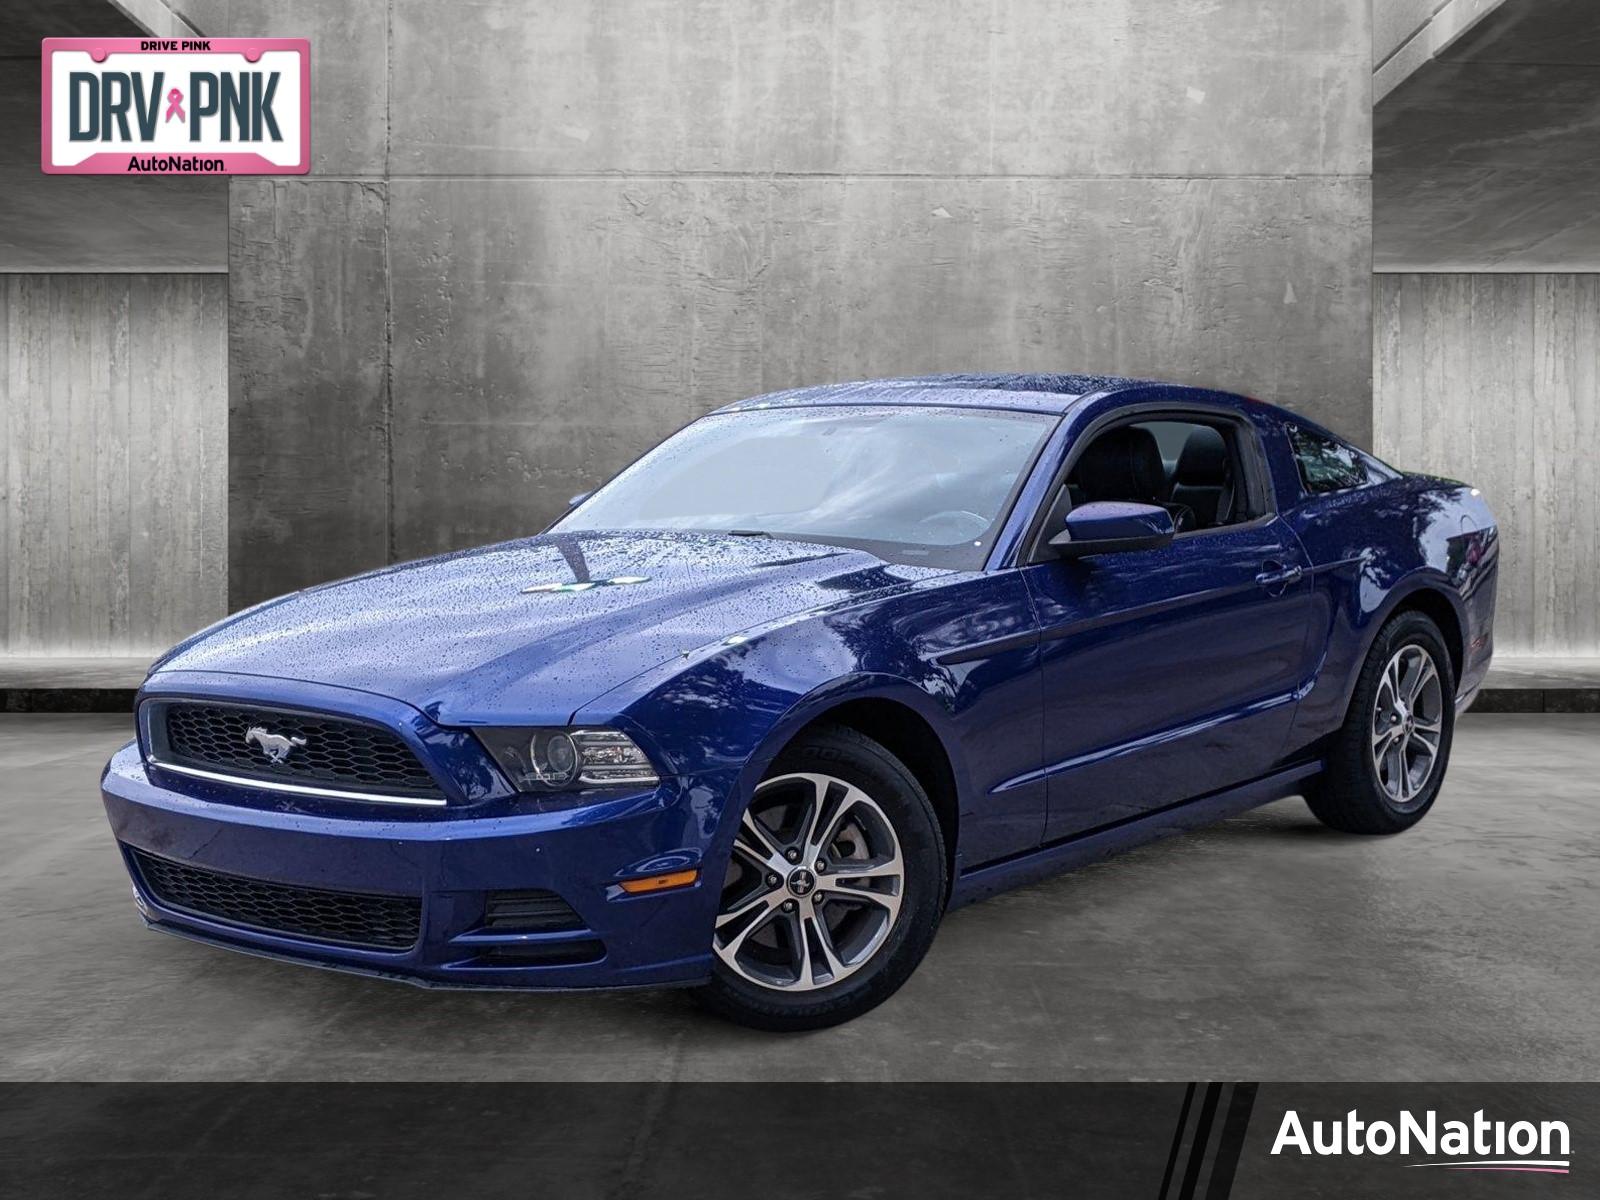 2014 Ford Mustang Vehicle Photo in PEMBROKE PINES, FL 33024-6534